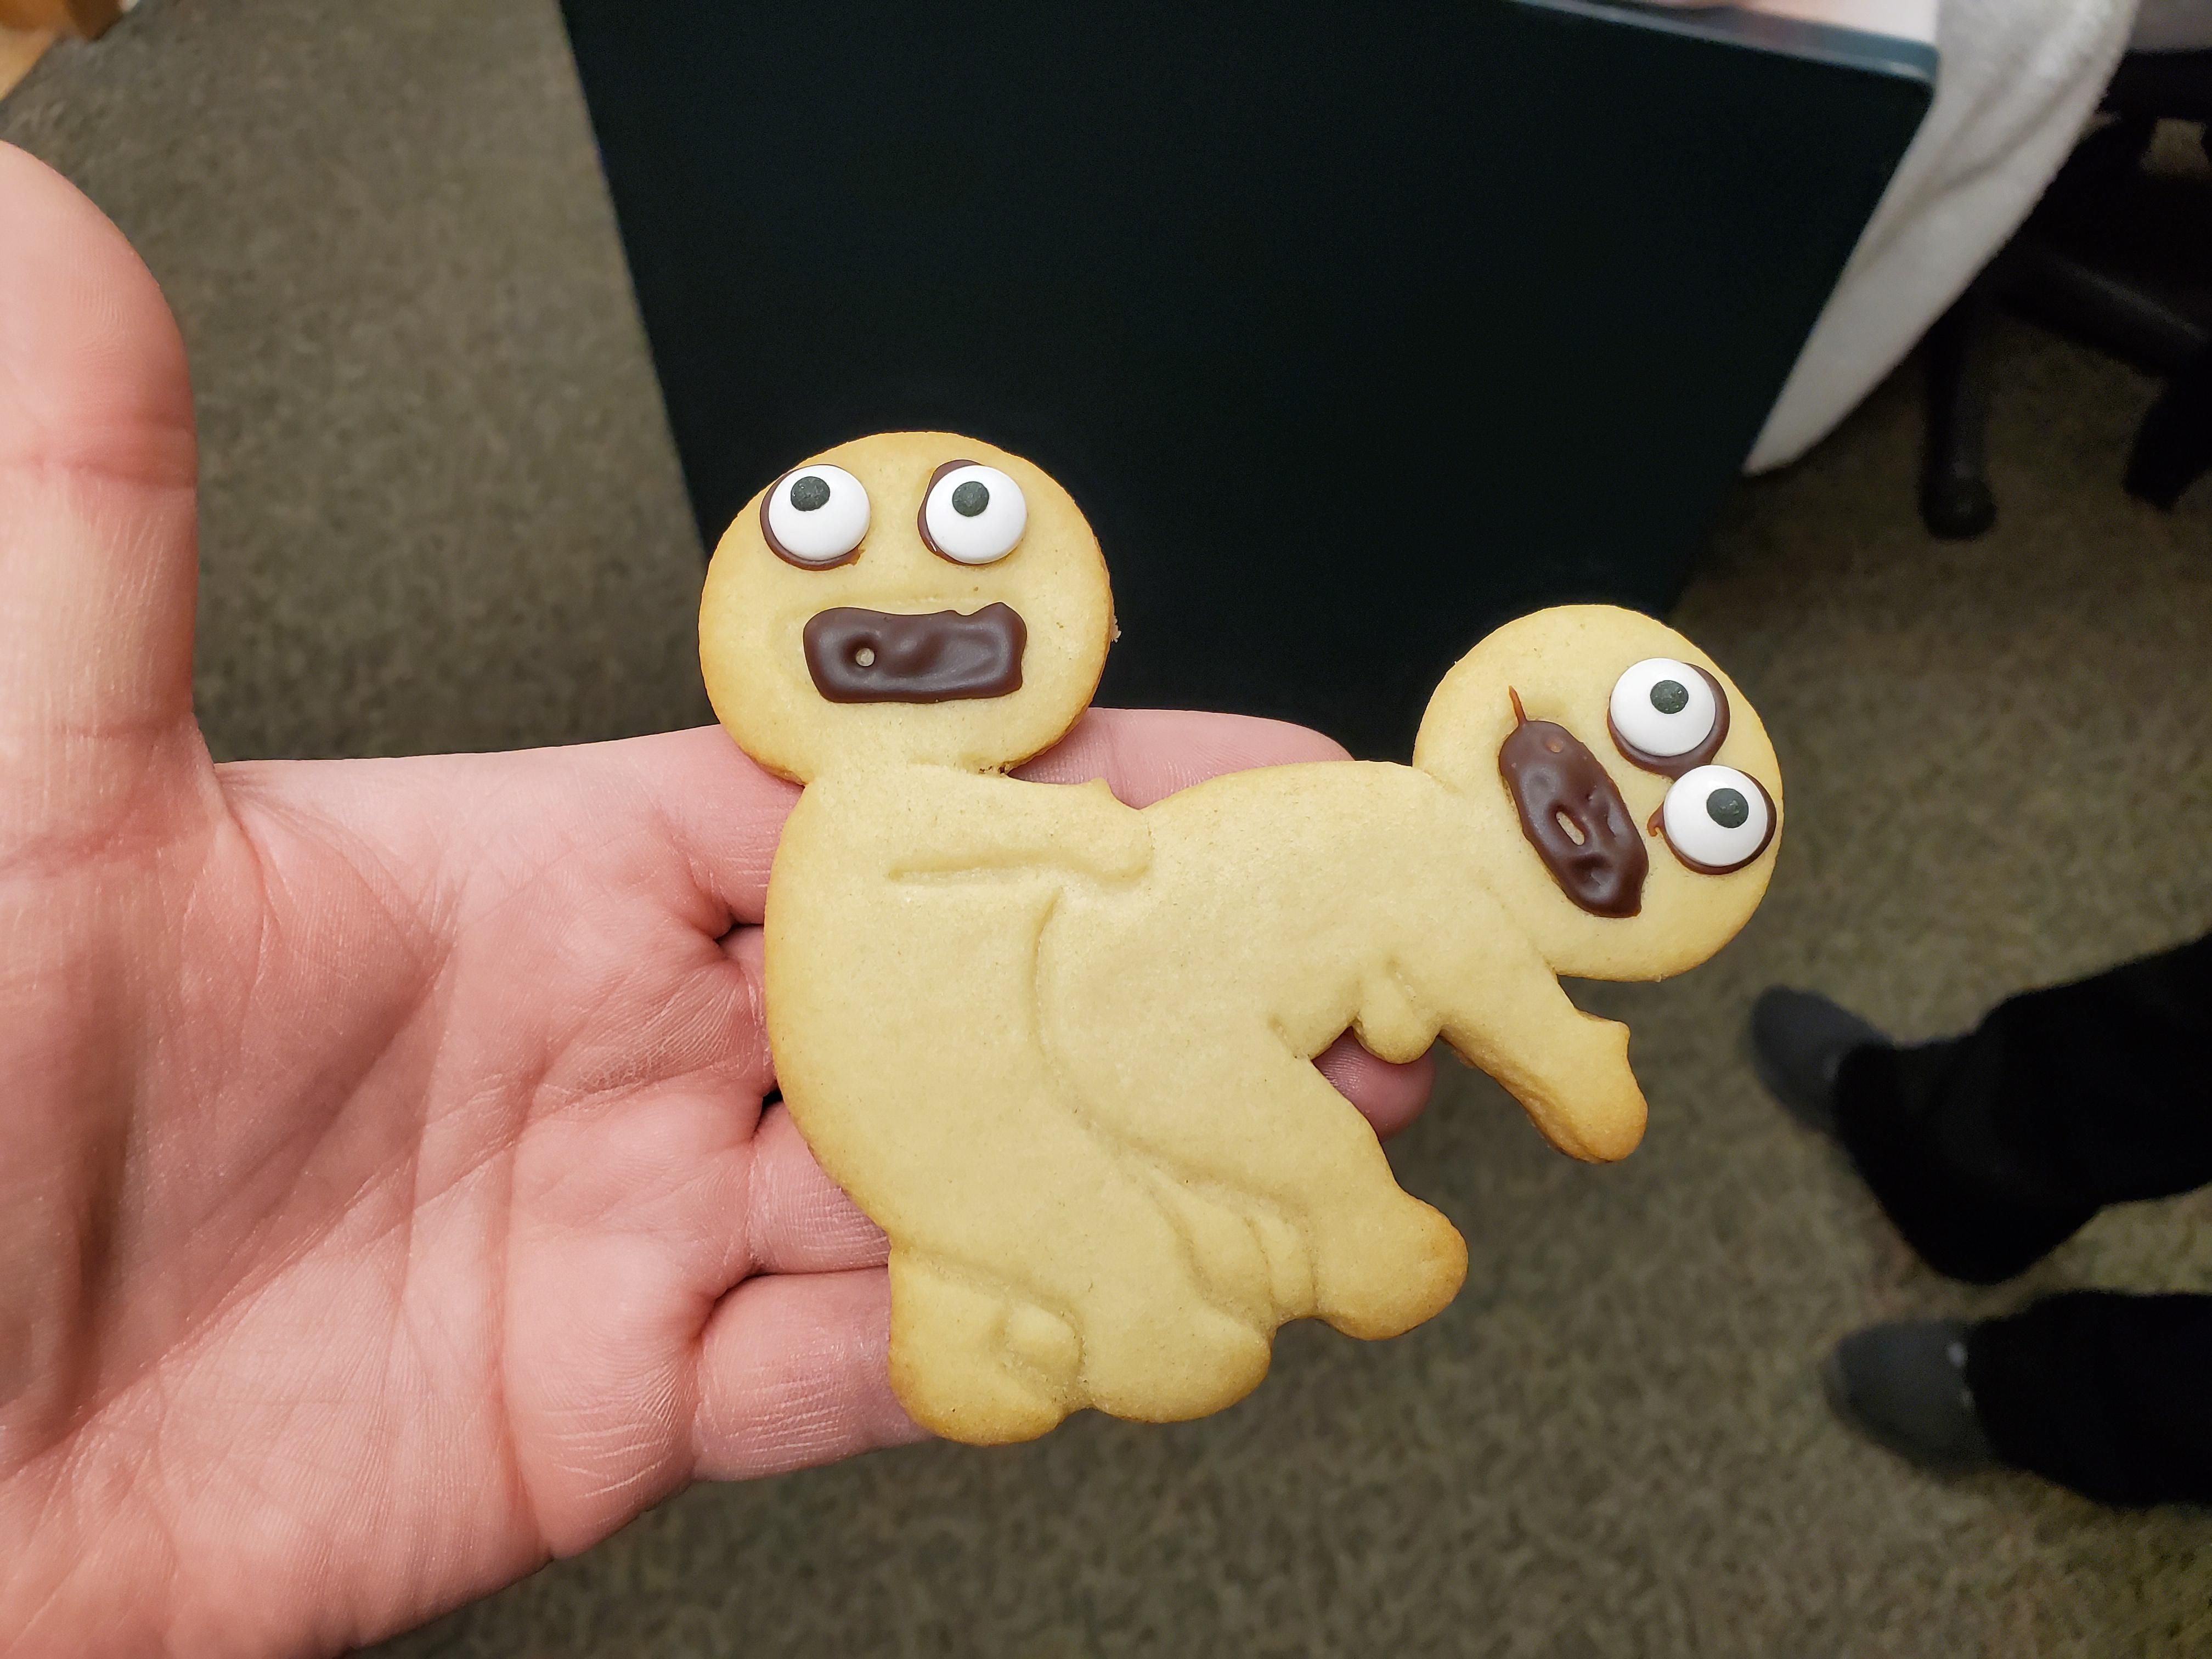 My friend made me some f*@#ing cookies for my birthday